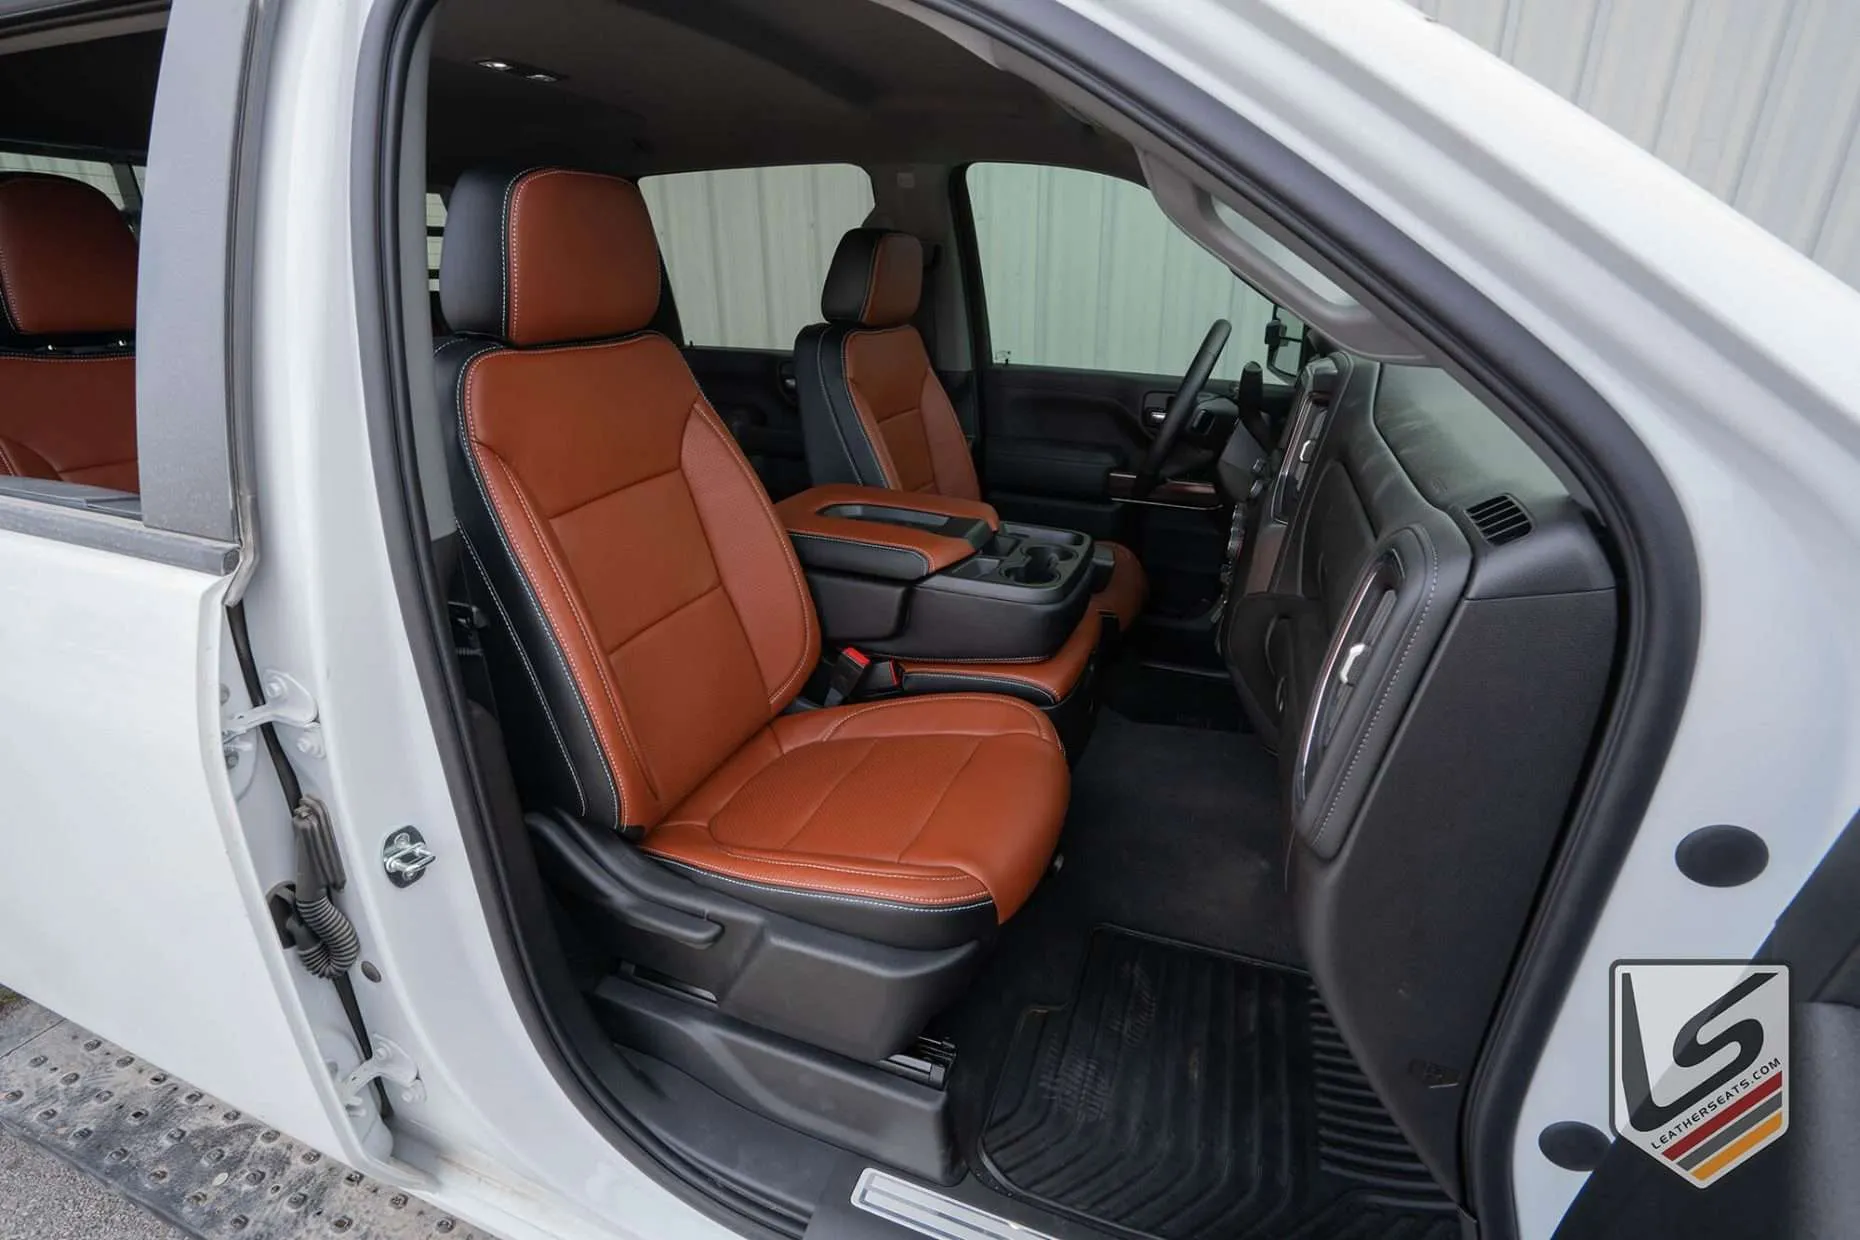 Silverado CrewCab/DoubleCab with custom leather seats in Black and Mitt Brown